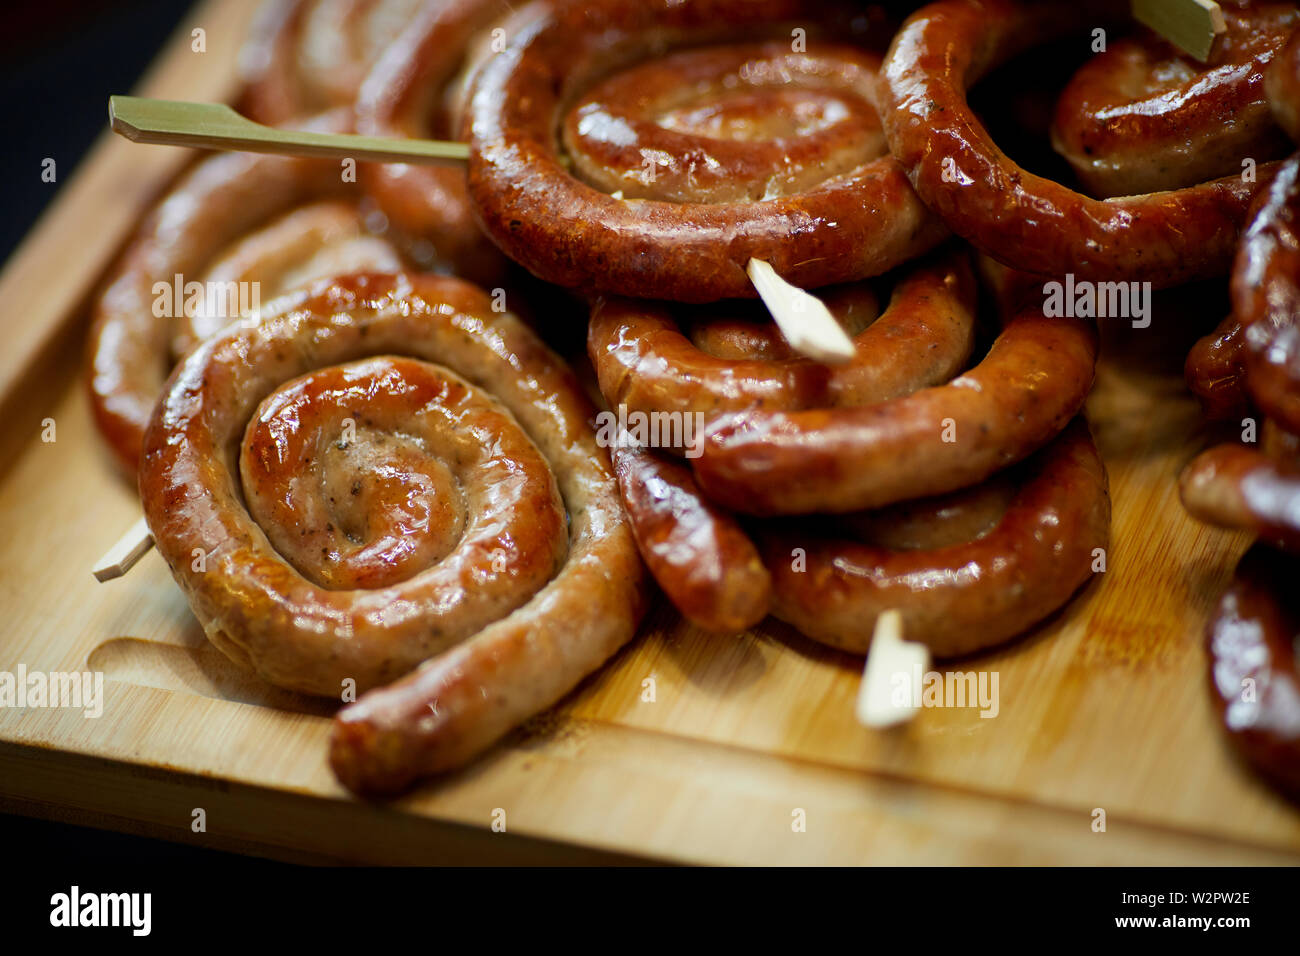 Rolled up round pork sausage  party food Stock Photo